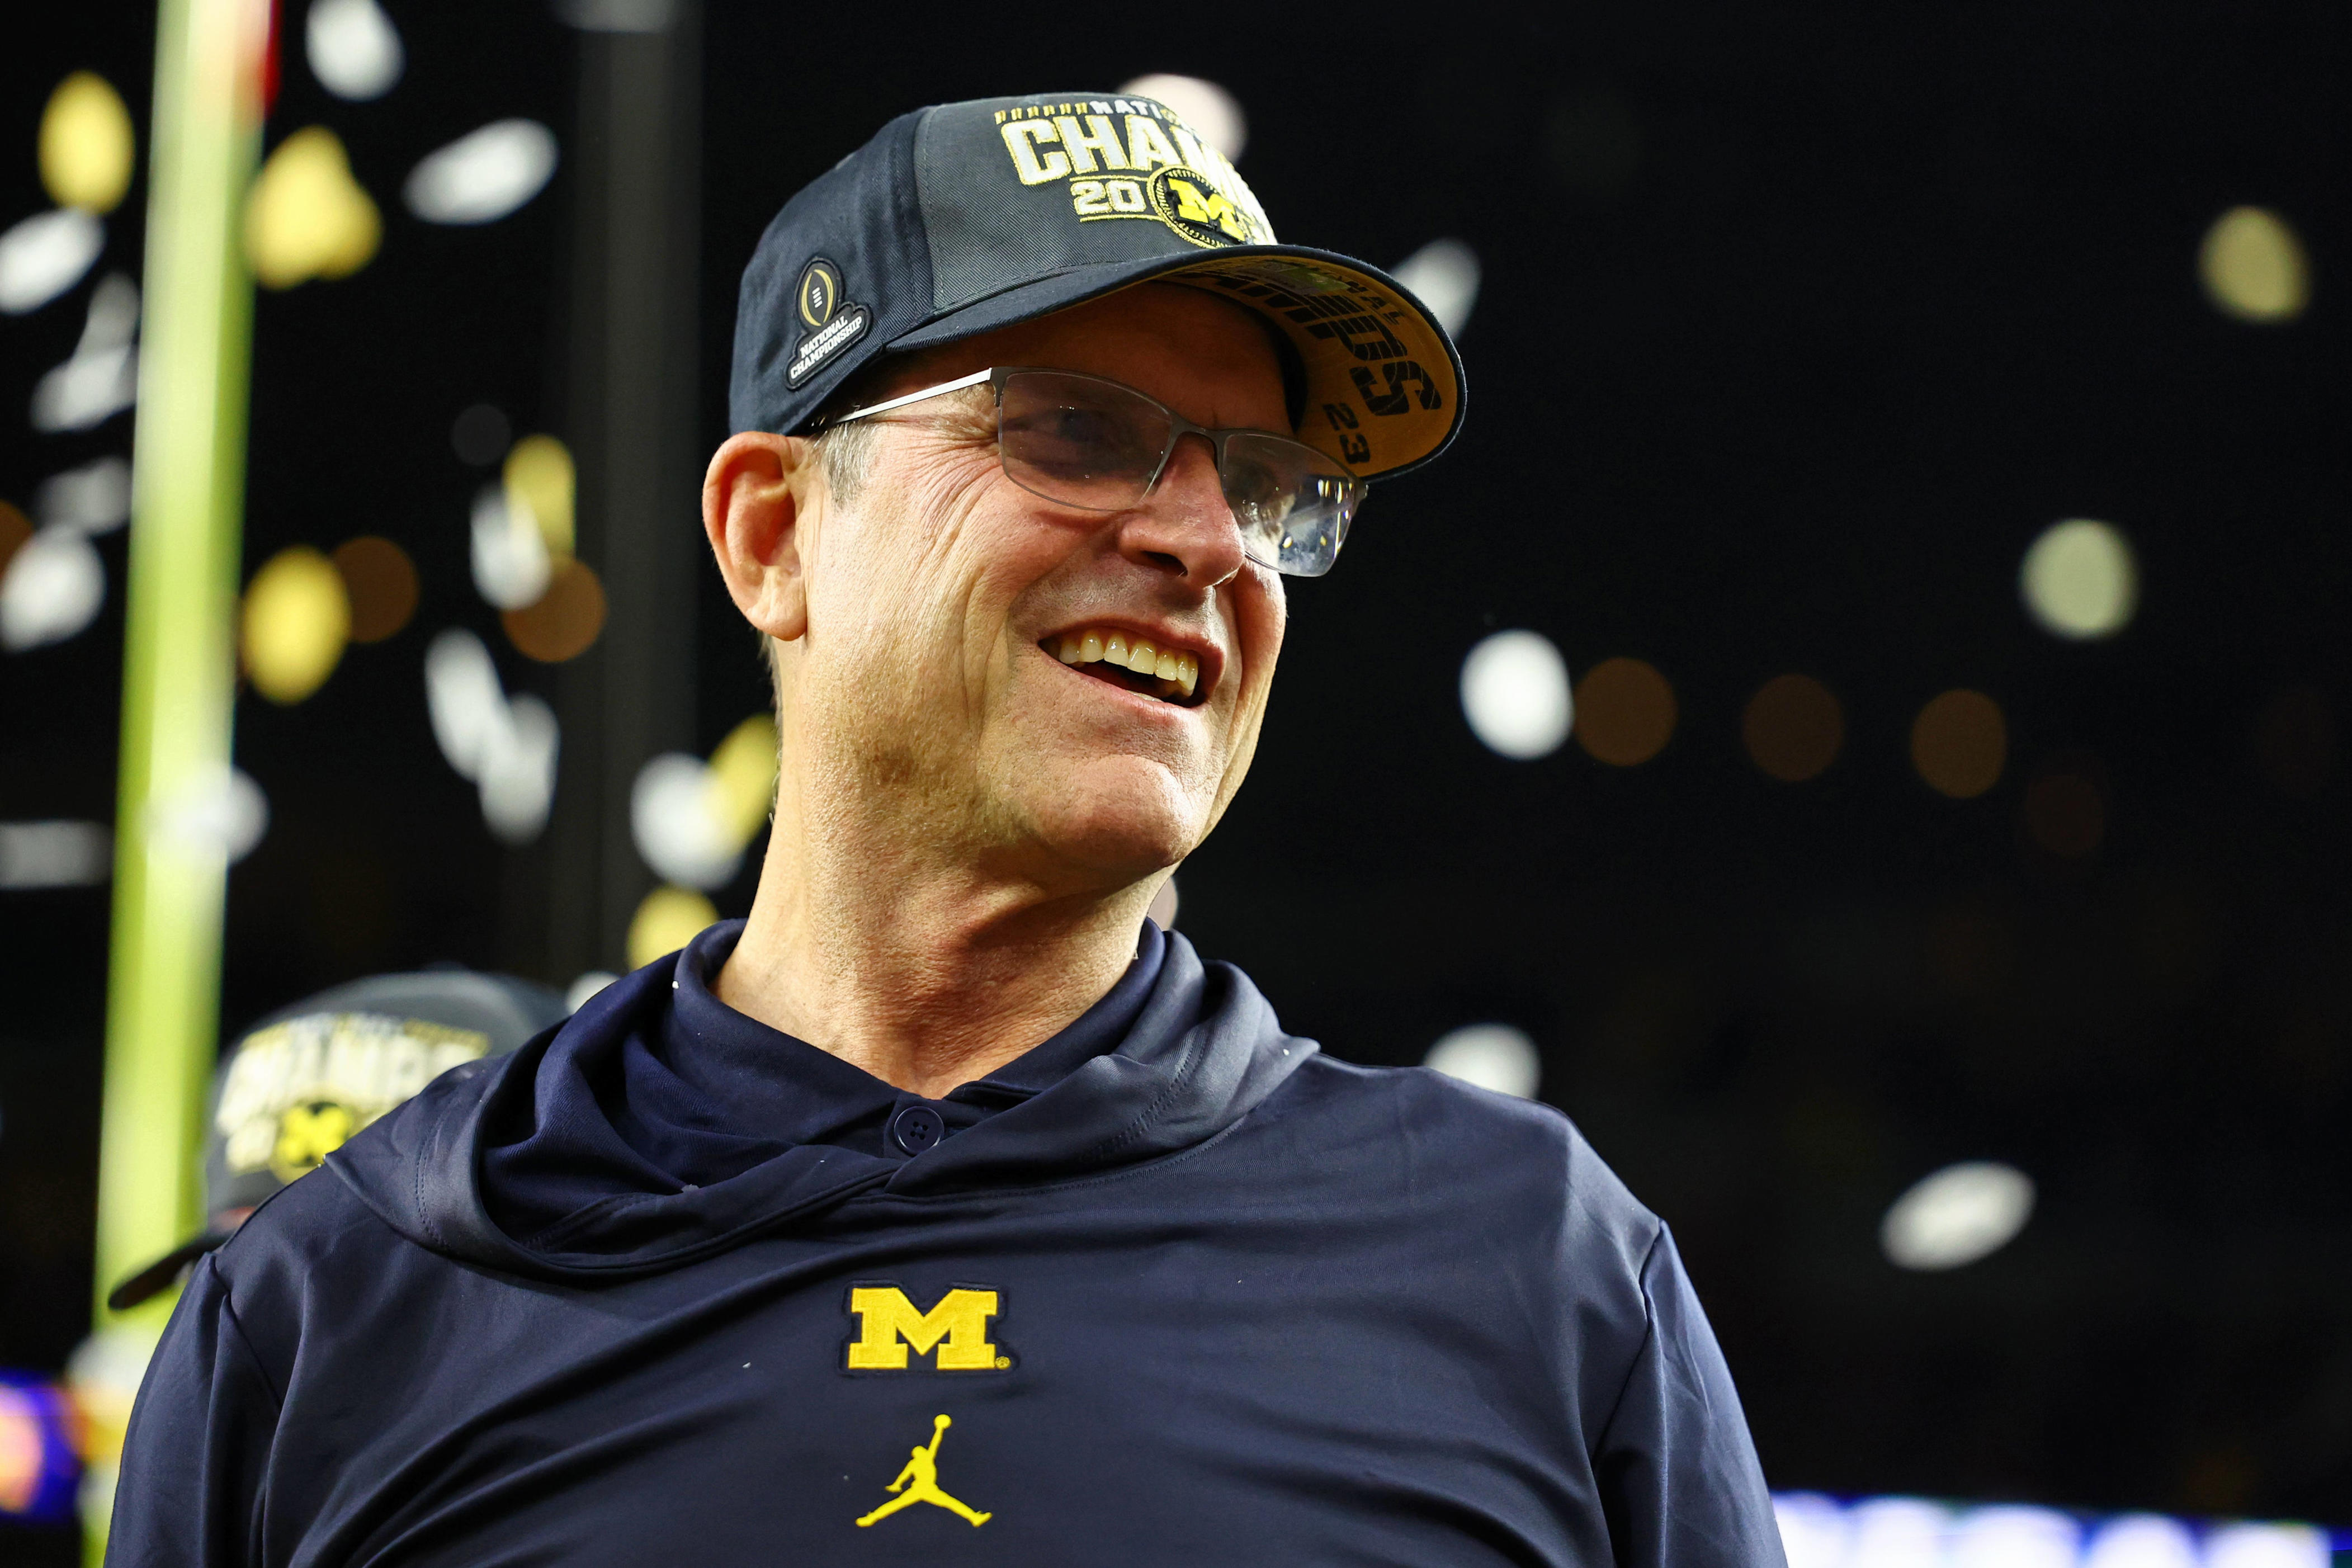 bonuses for college football coaches soar to new heights; harbaugh sets record with haul